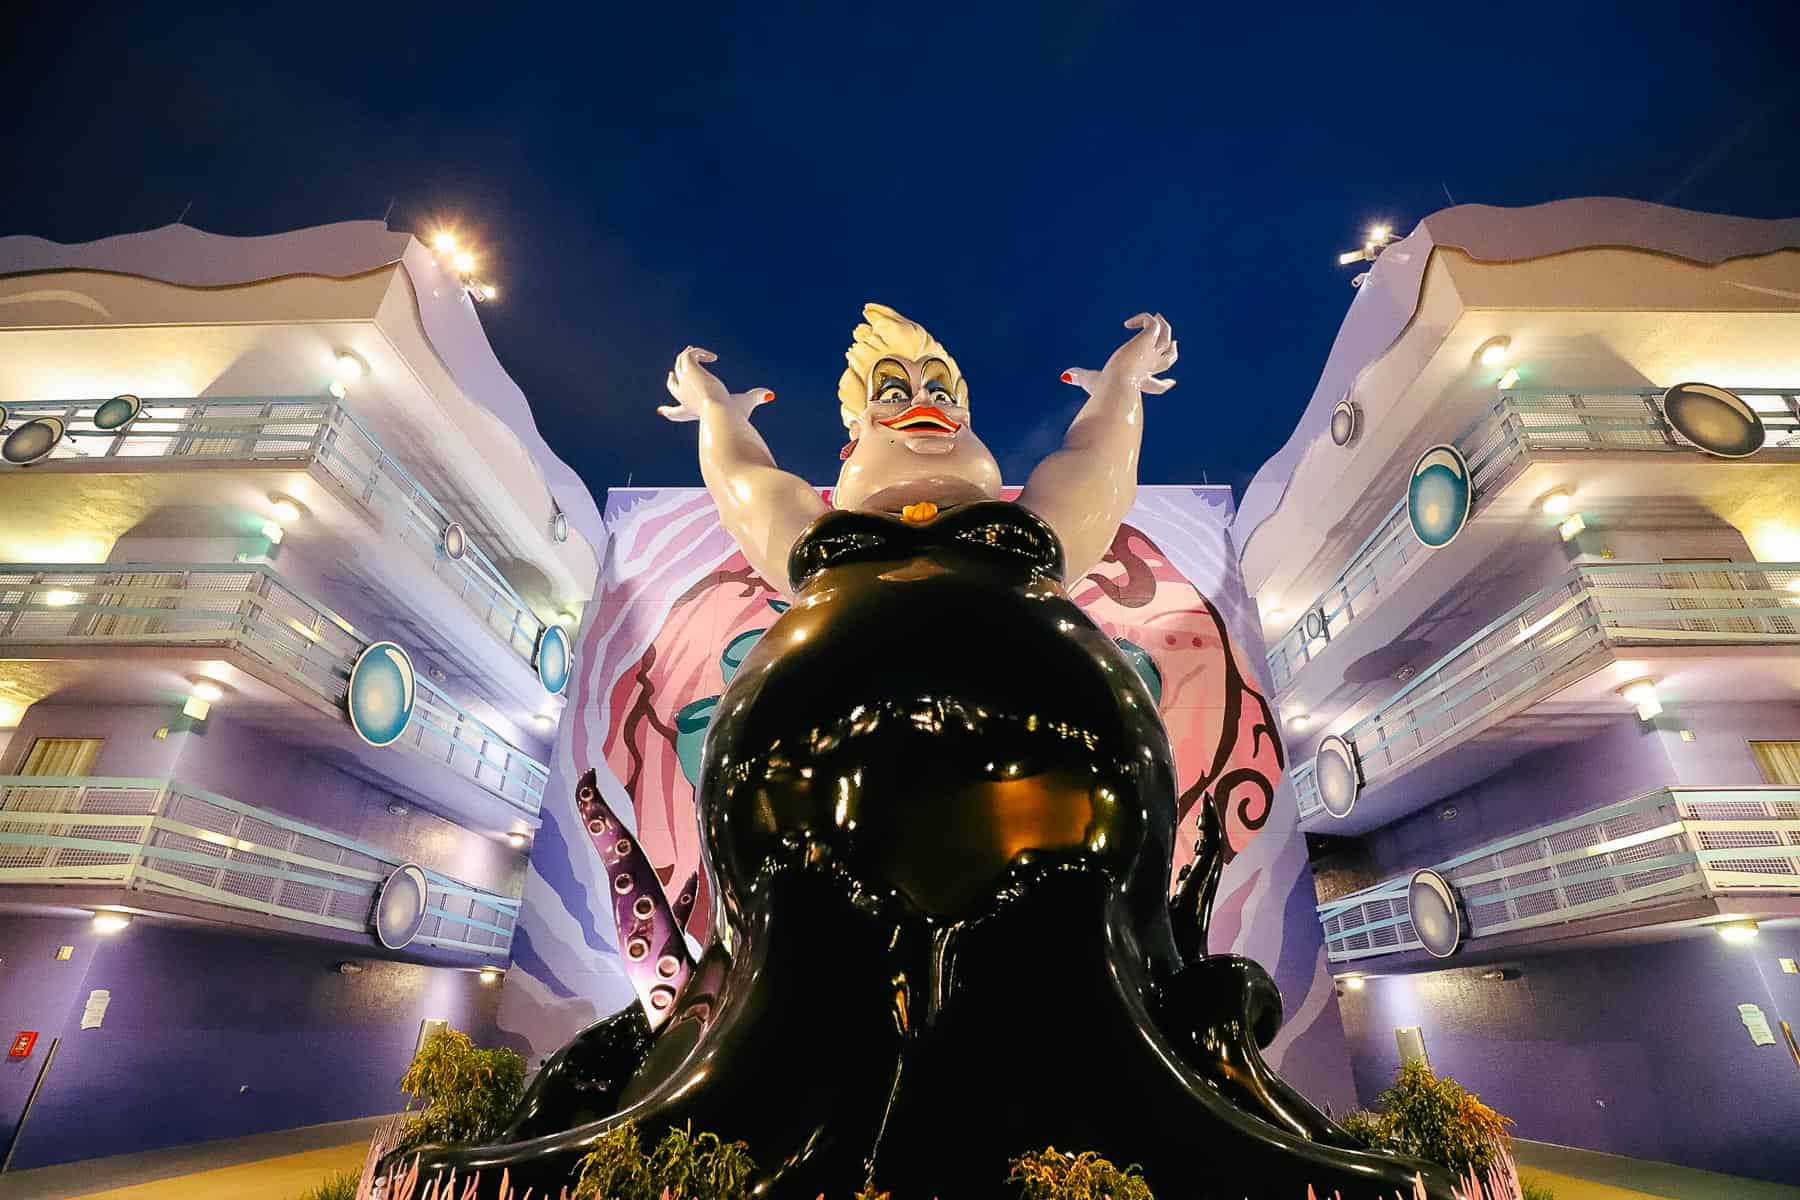 Ursula towers over one section of the Little Mermaid area at Disney's Art of Animation 